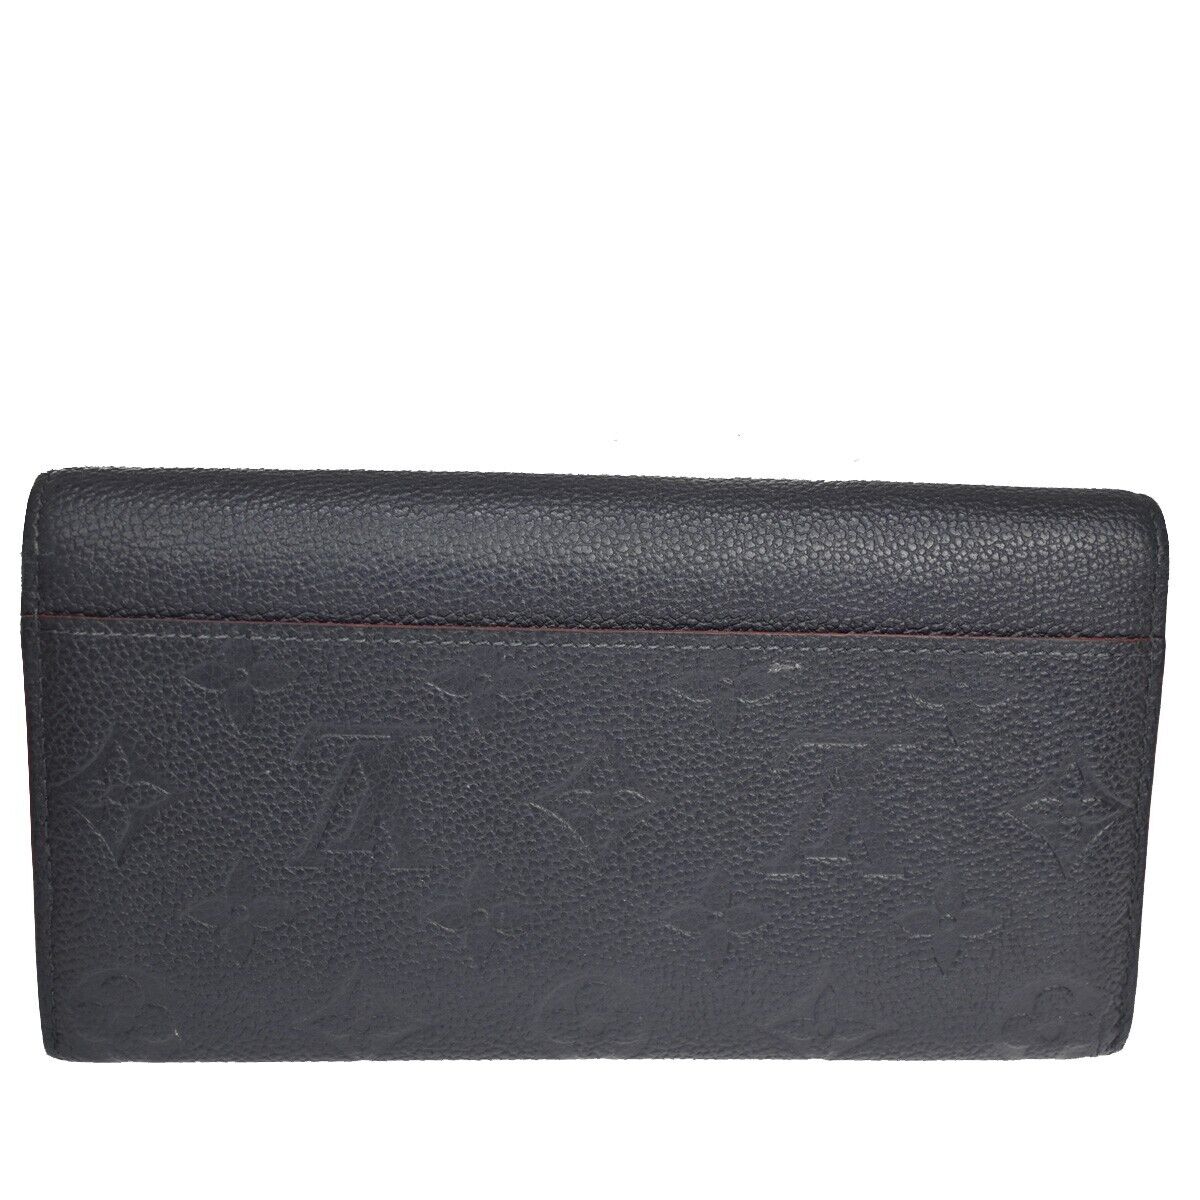 Pre-owned Louis Vuitton Portefeuille Sarah Navy Leather Wallet  ()